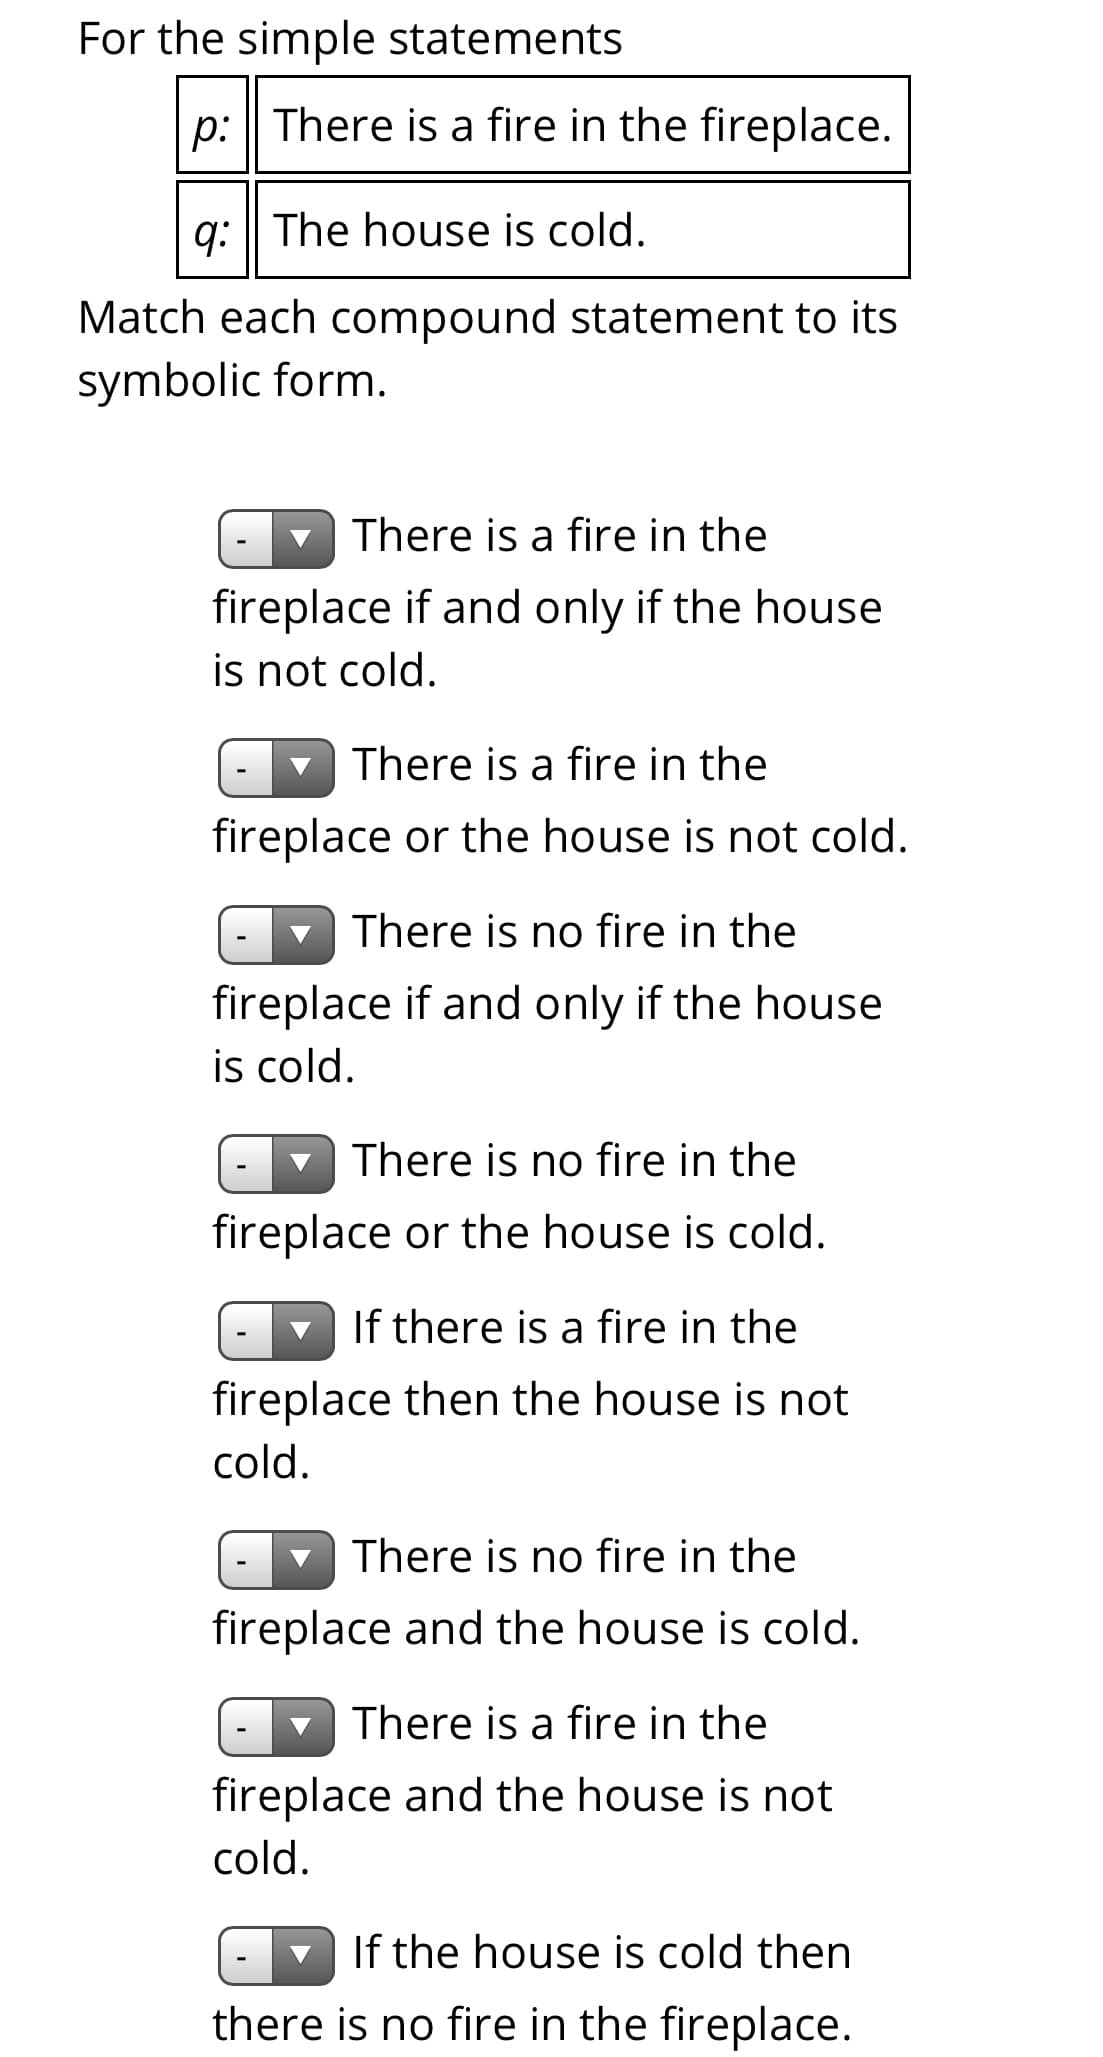 For the simple statements
p: There is a fire in the fireplace.
q: || The house is cold.
Match each compound statement to its
symbolic form.
- There is a fire in the
fireplace if and only if the house
is not cold.
v There is a fire in the
fireplace or the house is not cold.
There is no fire in the
fireplace if and only if the house
is cold.
There is no fire in the
fireplace or the house is cold.
If there is a fire in the
fireplace then the house is not
cold.
There is no fire in the
fireplace and the house is cold.
- There is a fire in the
fireplace and the house is not
cold.
If the house is cold then
there is no fire in the fireplace.
